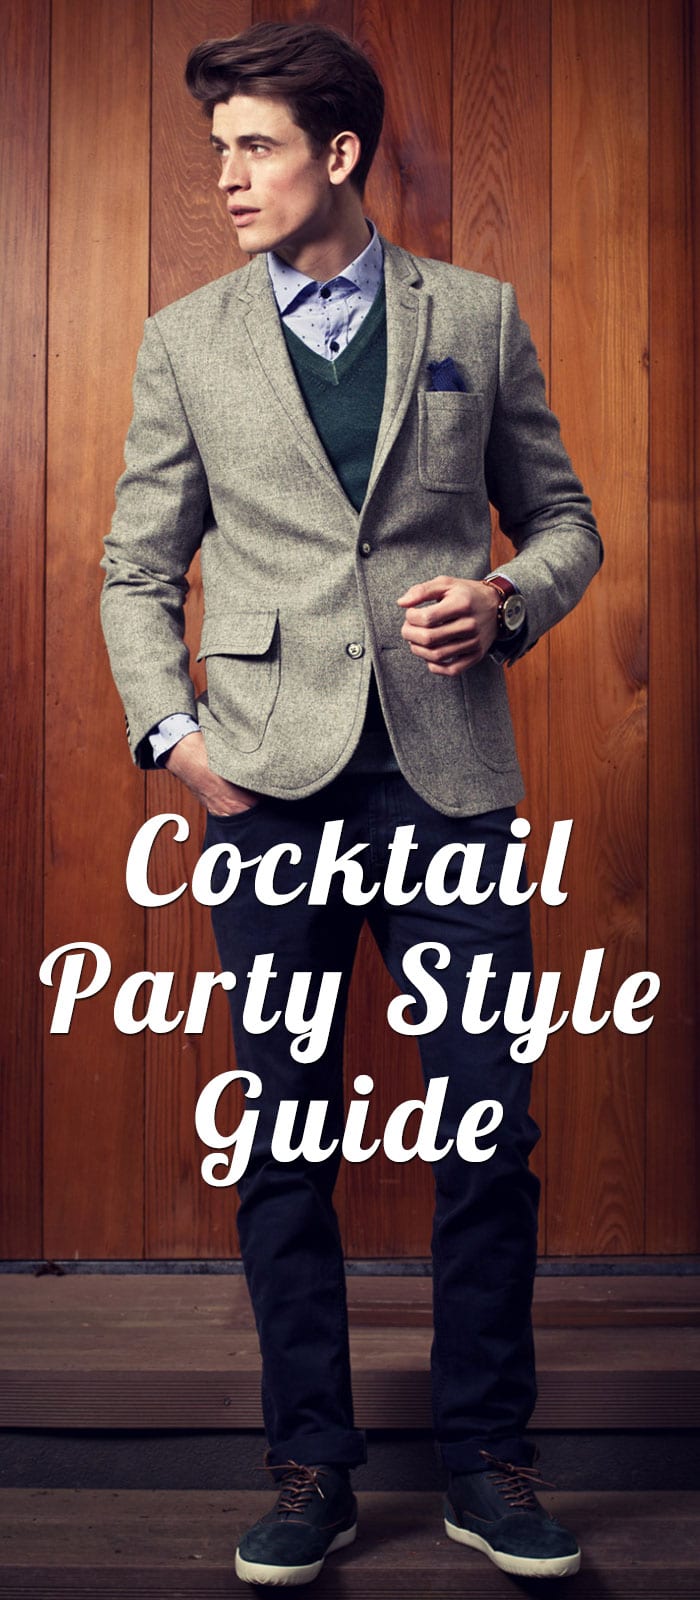 Cocktail Party Style Guide – Outfit Ideas, Tips, Guide, Images, Footwear, Etc